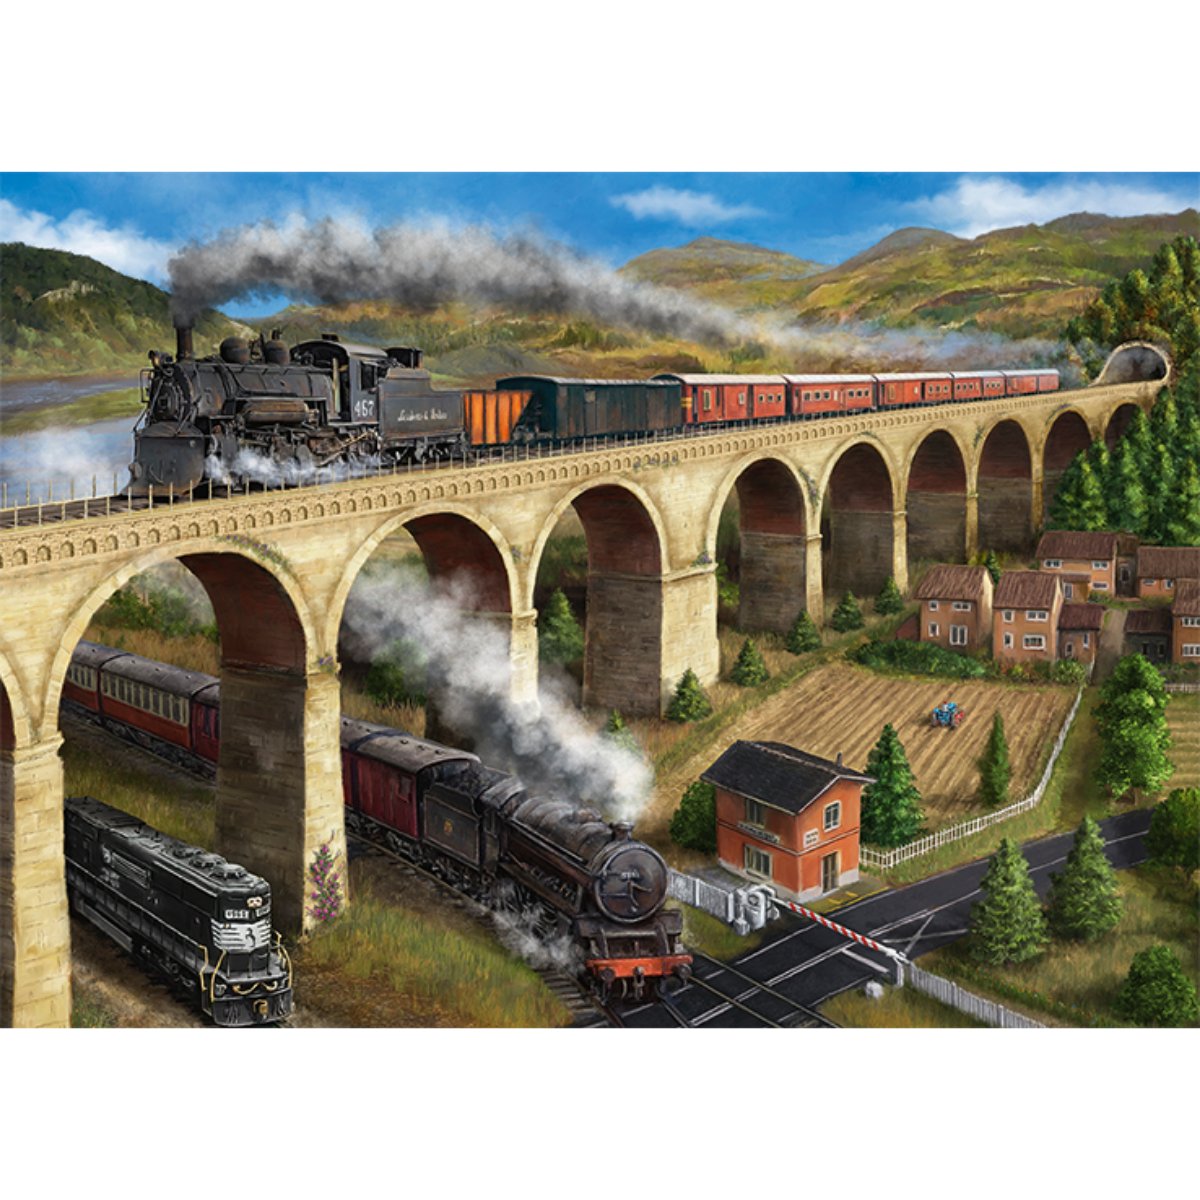 Falcon The Viaduct Jigsaw Puzzle (1000 Pieces) - Phillips Hobbies